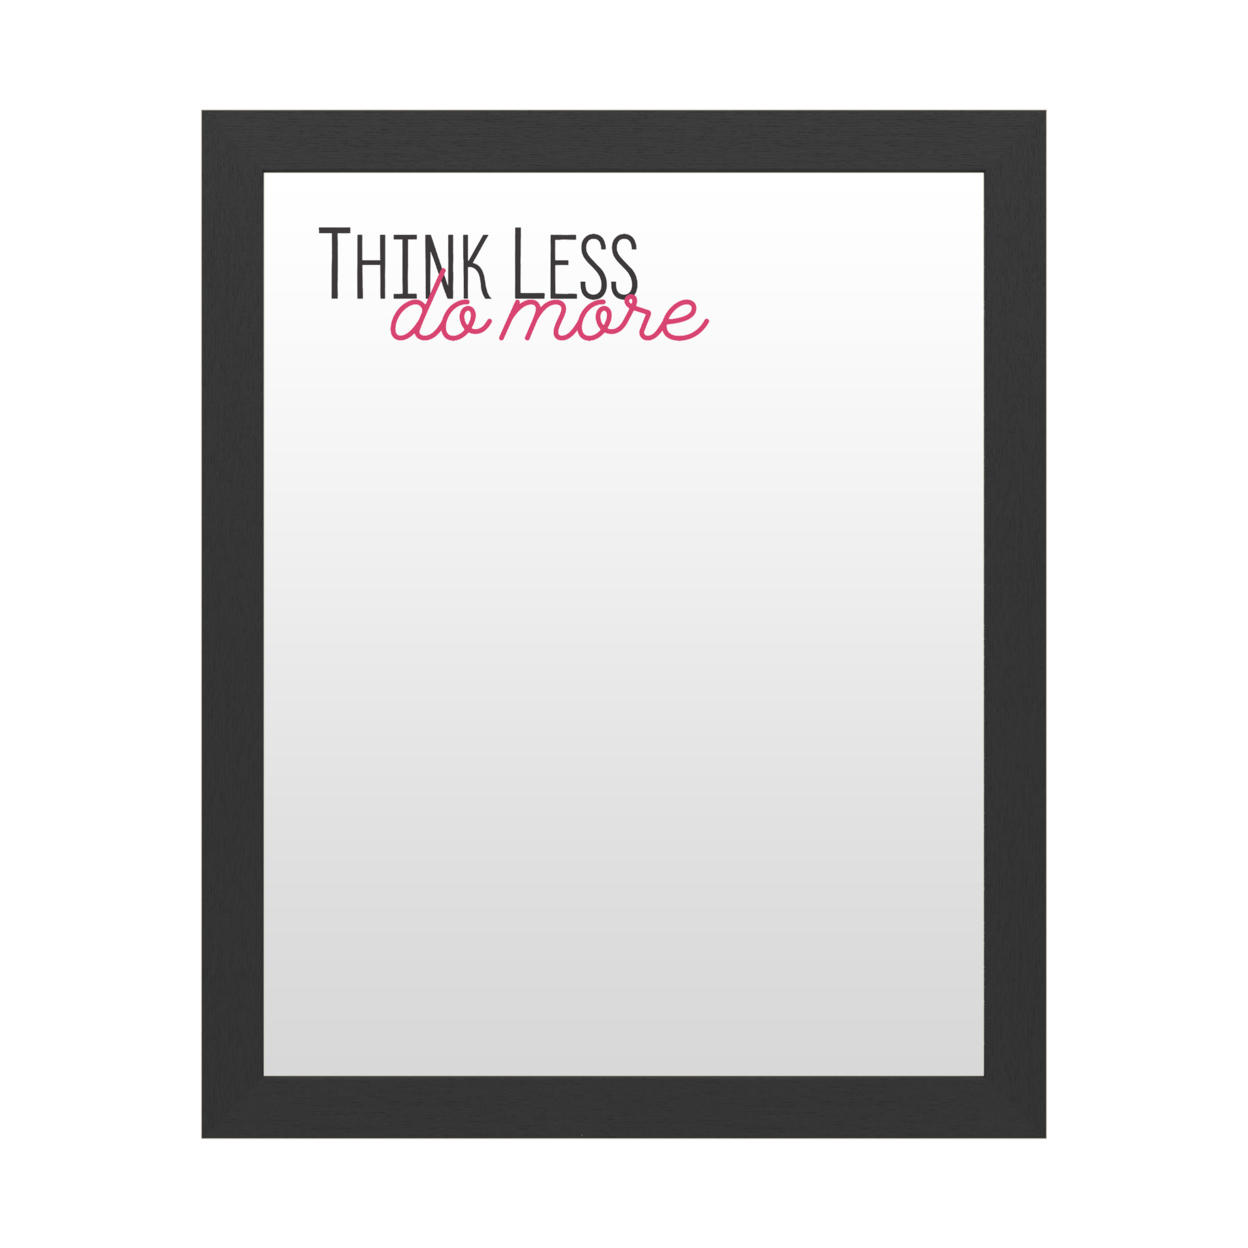 Dry Erase 16 X 20 Marker Board With Printed Artwork - Think Less Do More White Board - Ready To Hang